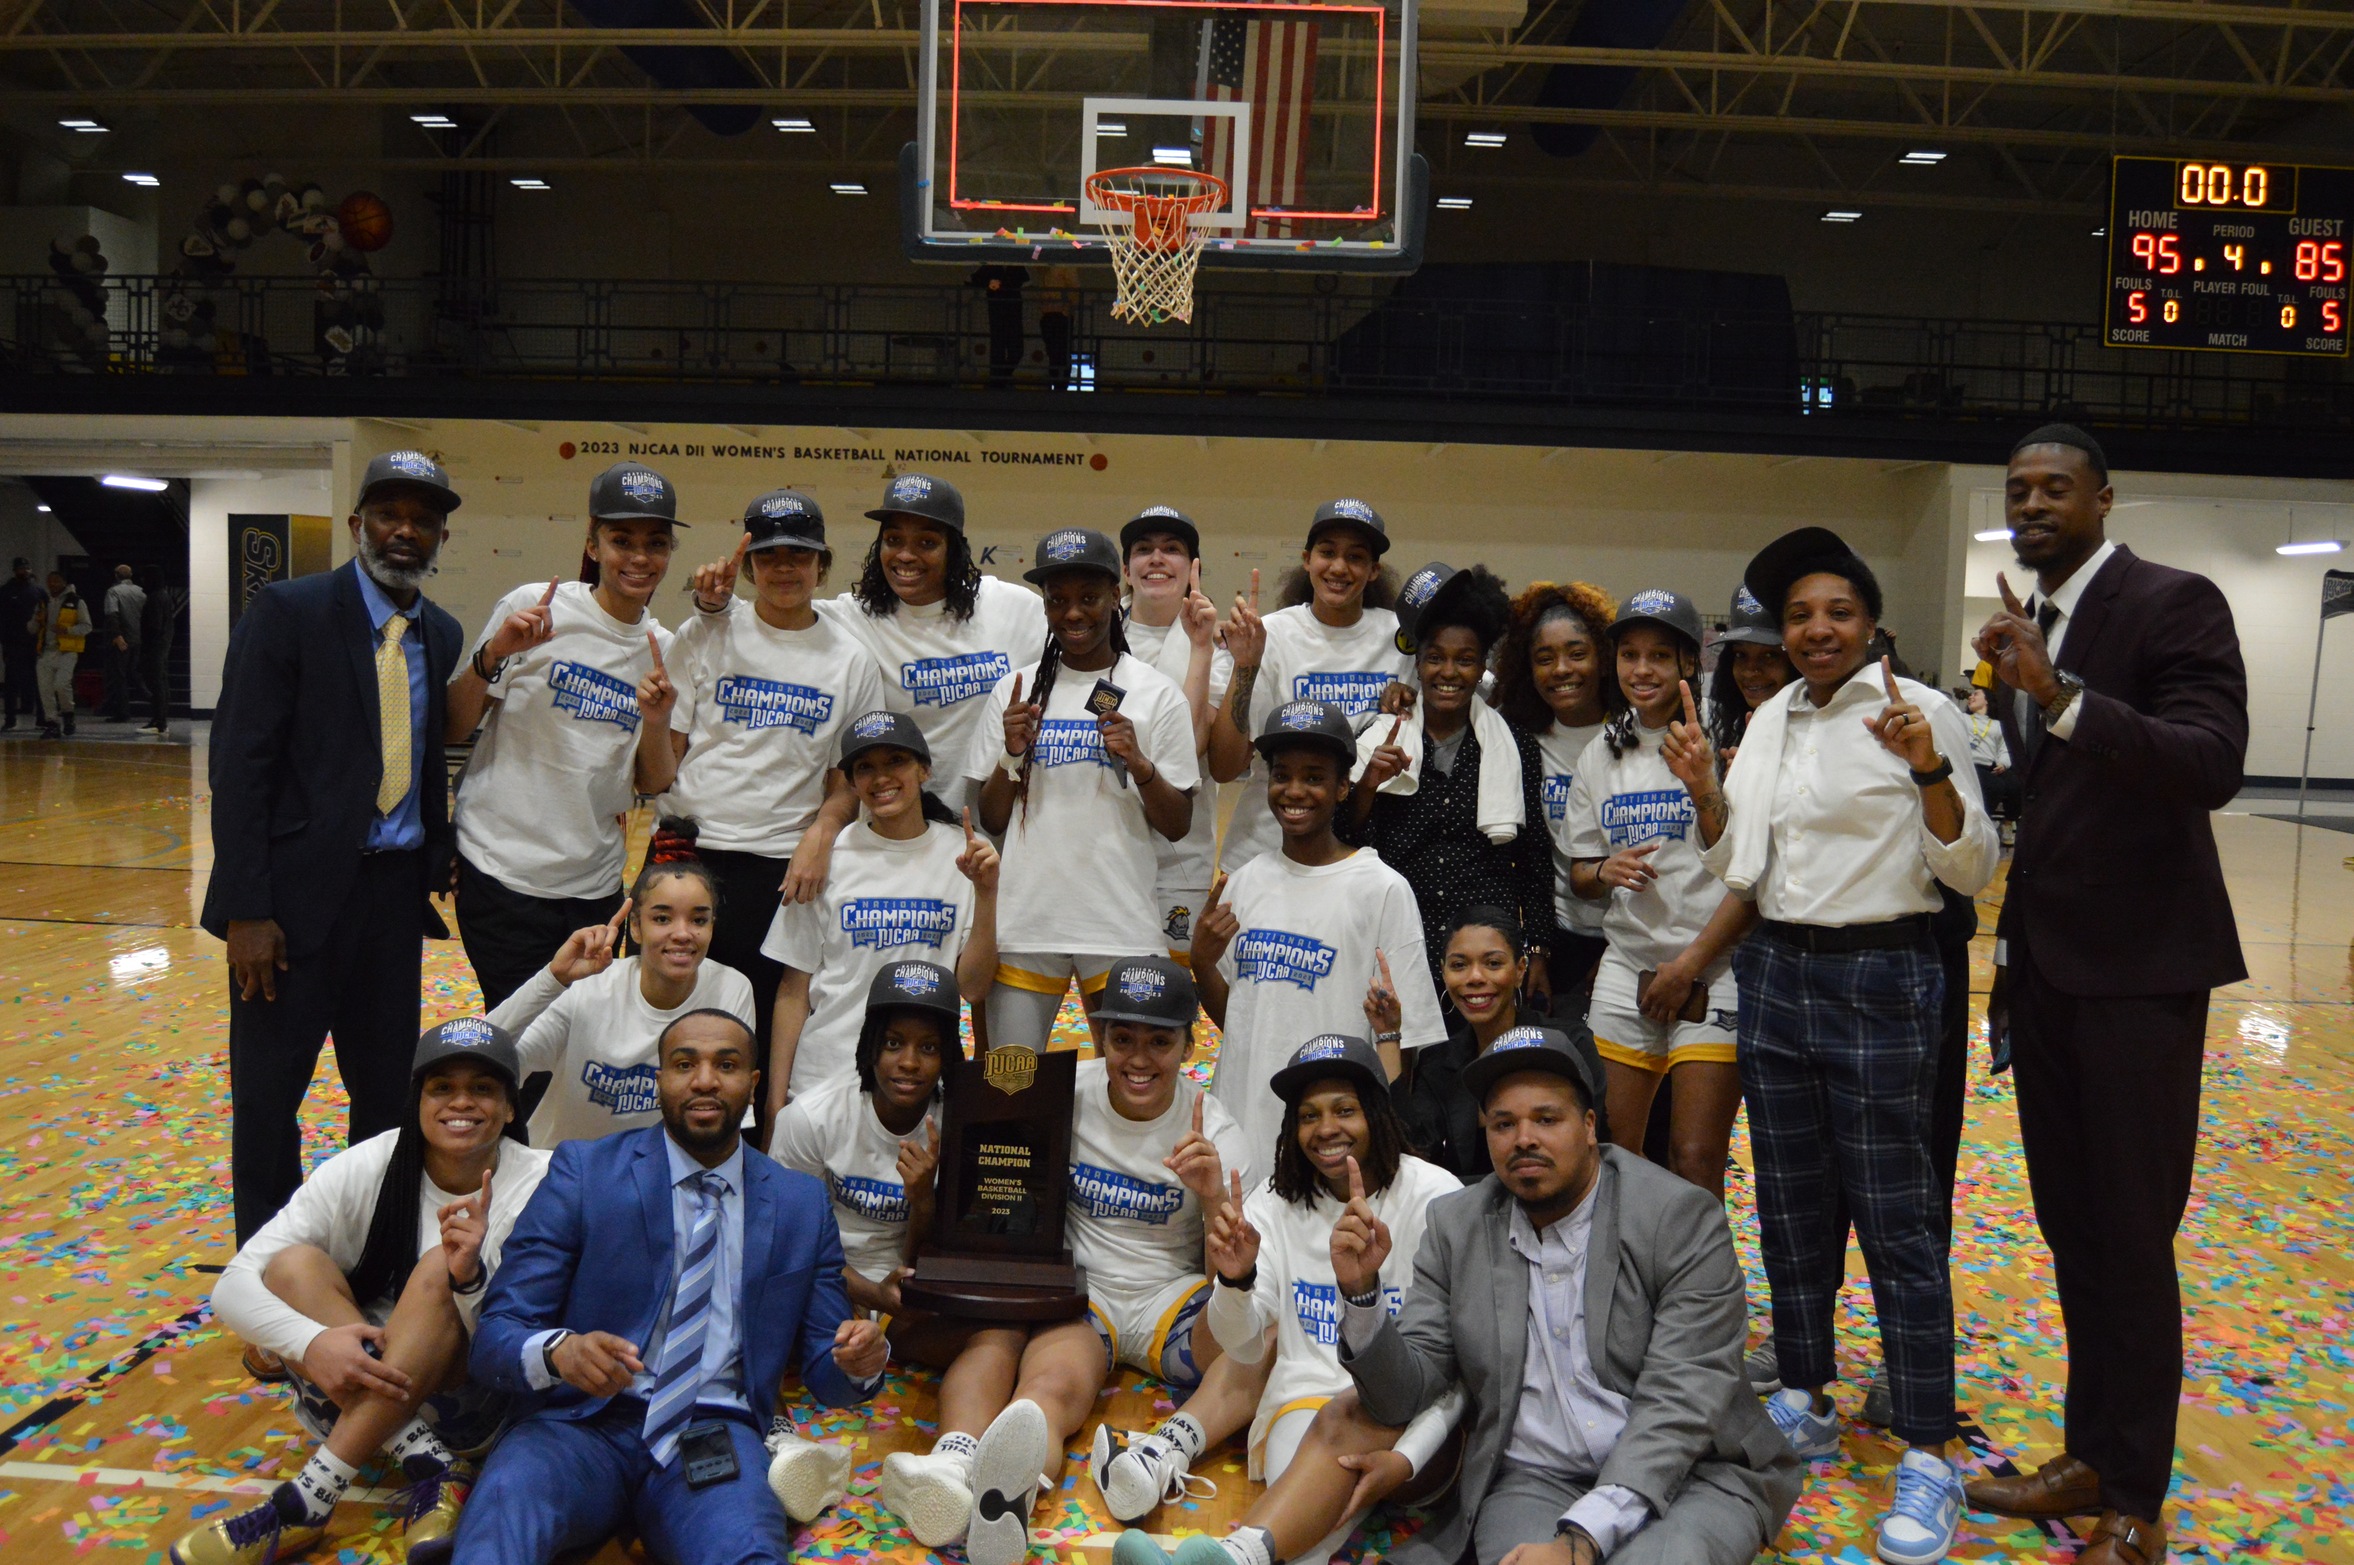 Champs! CCBC Essex Claims NJCAA DII Women's Basketball Title